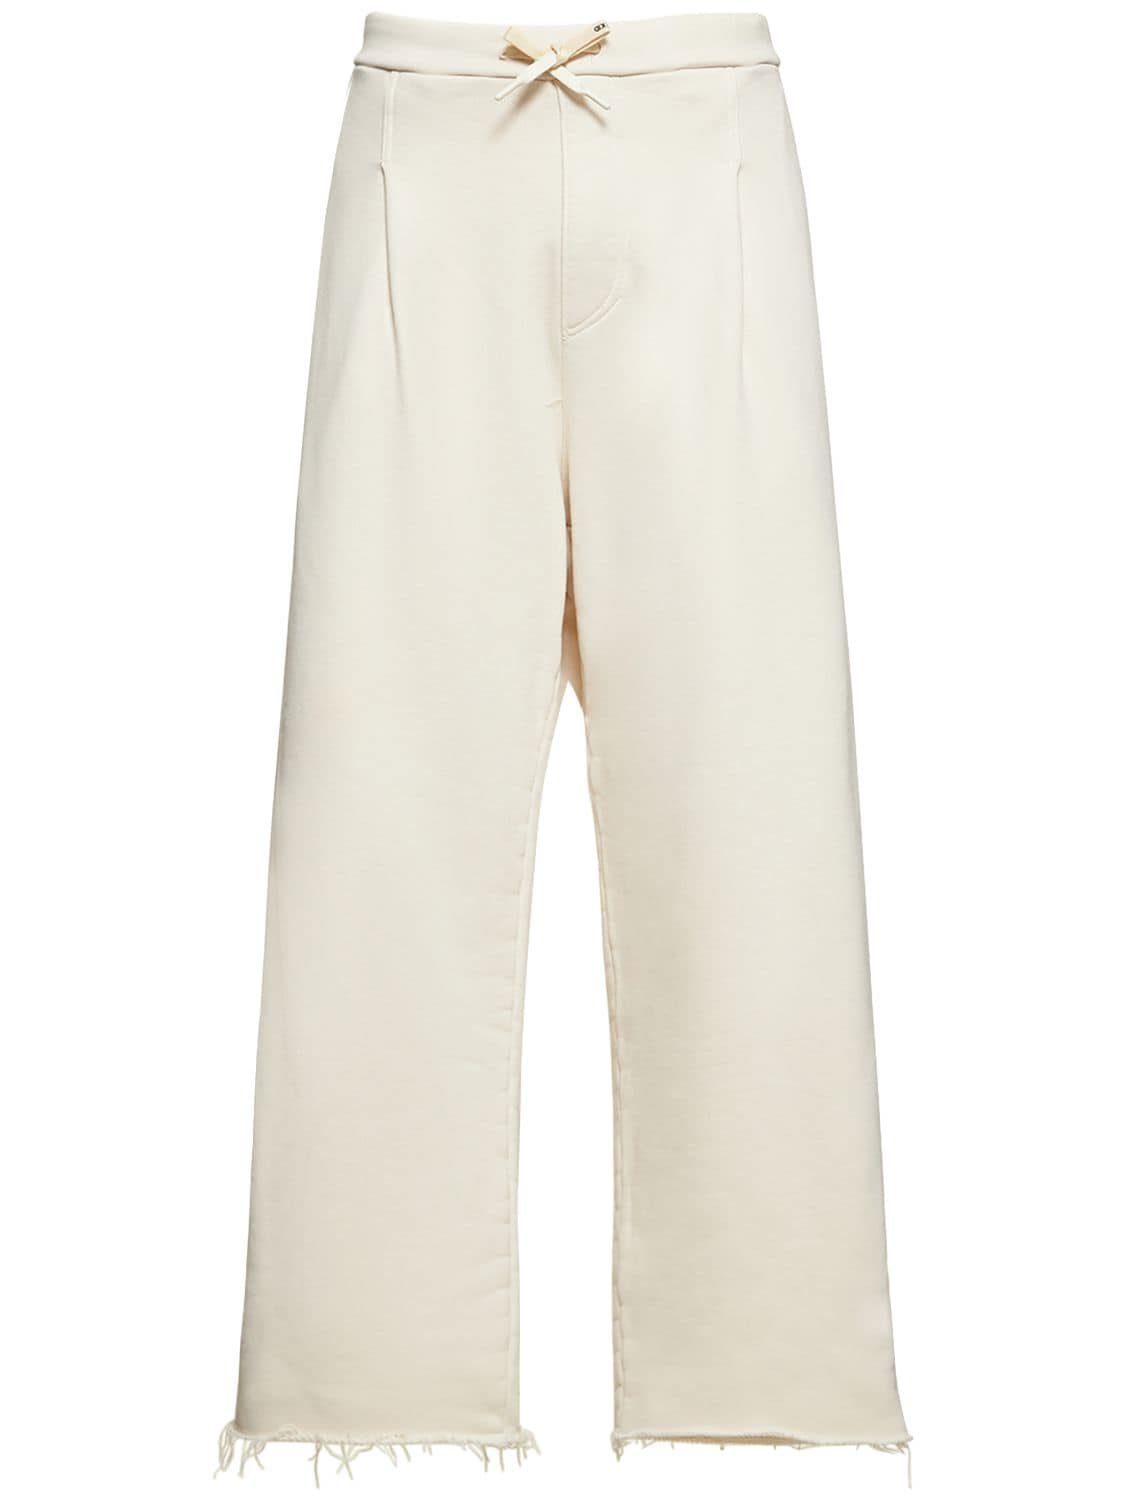 A Paper Kid Unisex Sweatpants In White